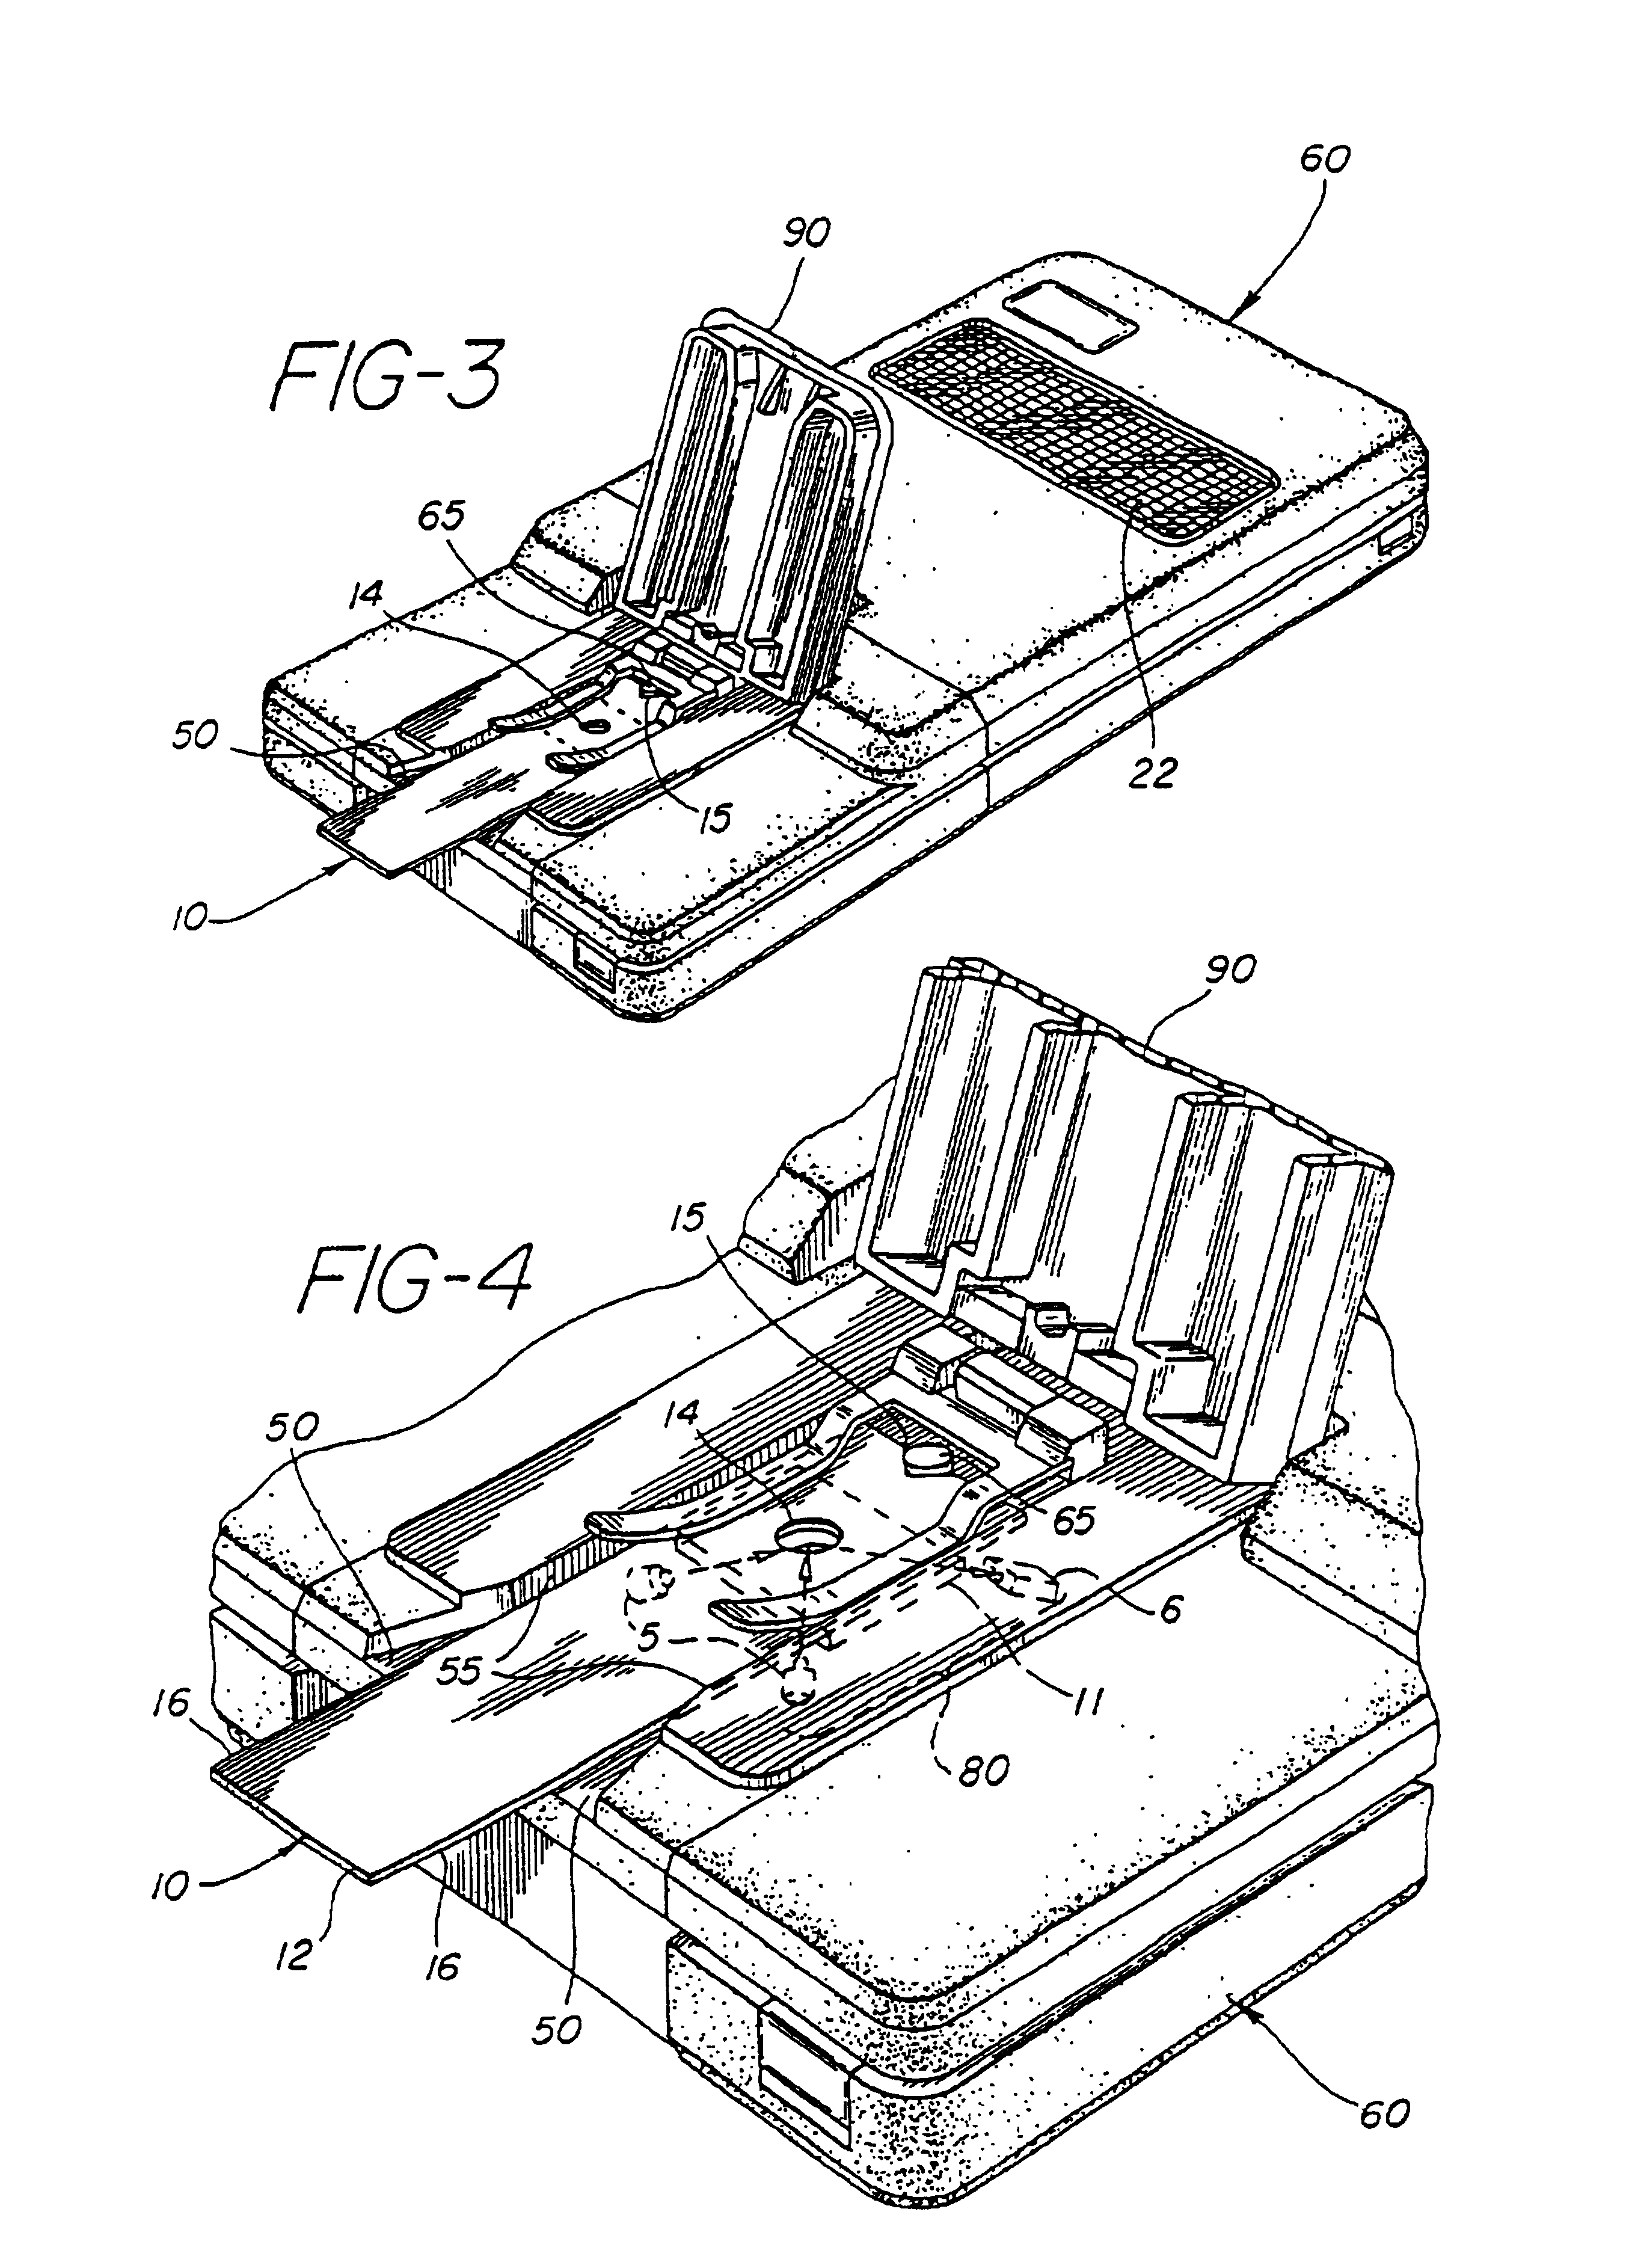 Method for the determination of glucose employing an apparatus emplaced matrix